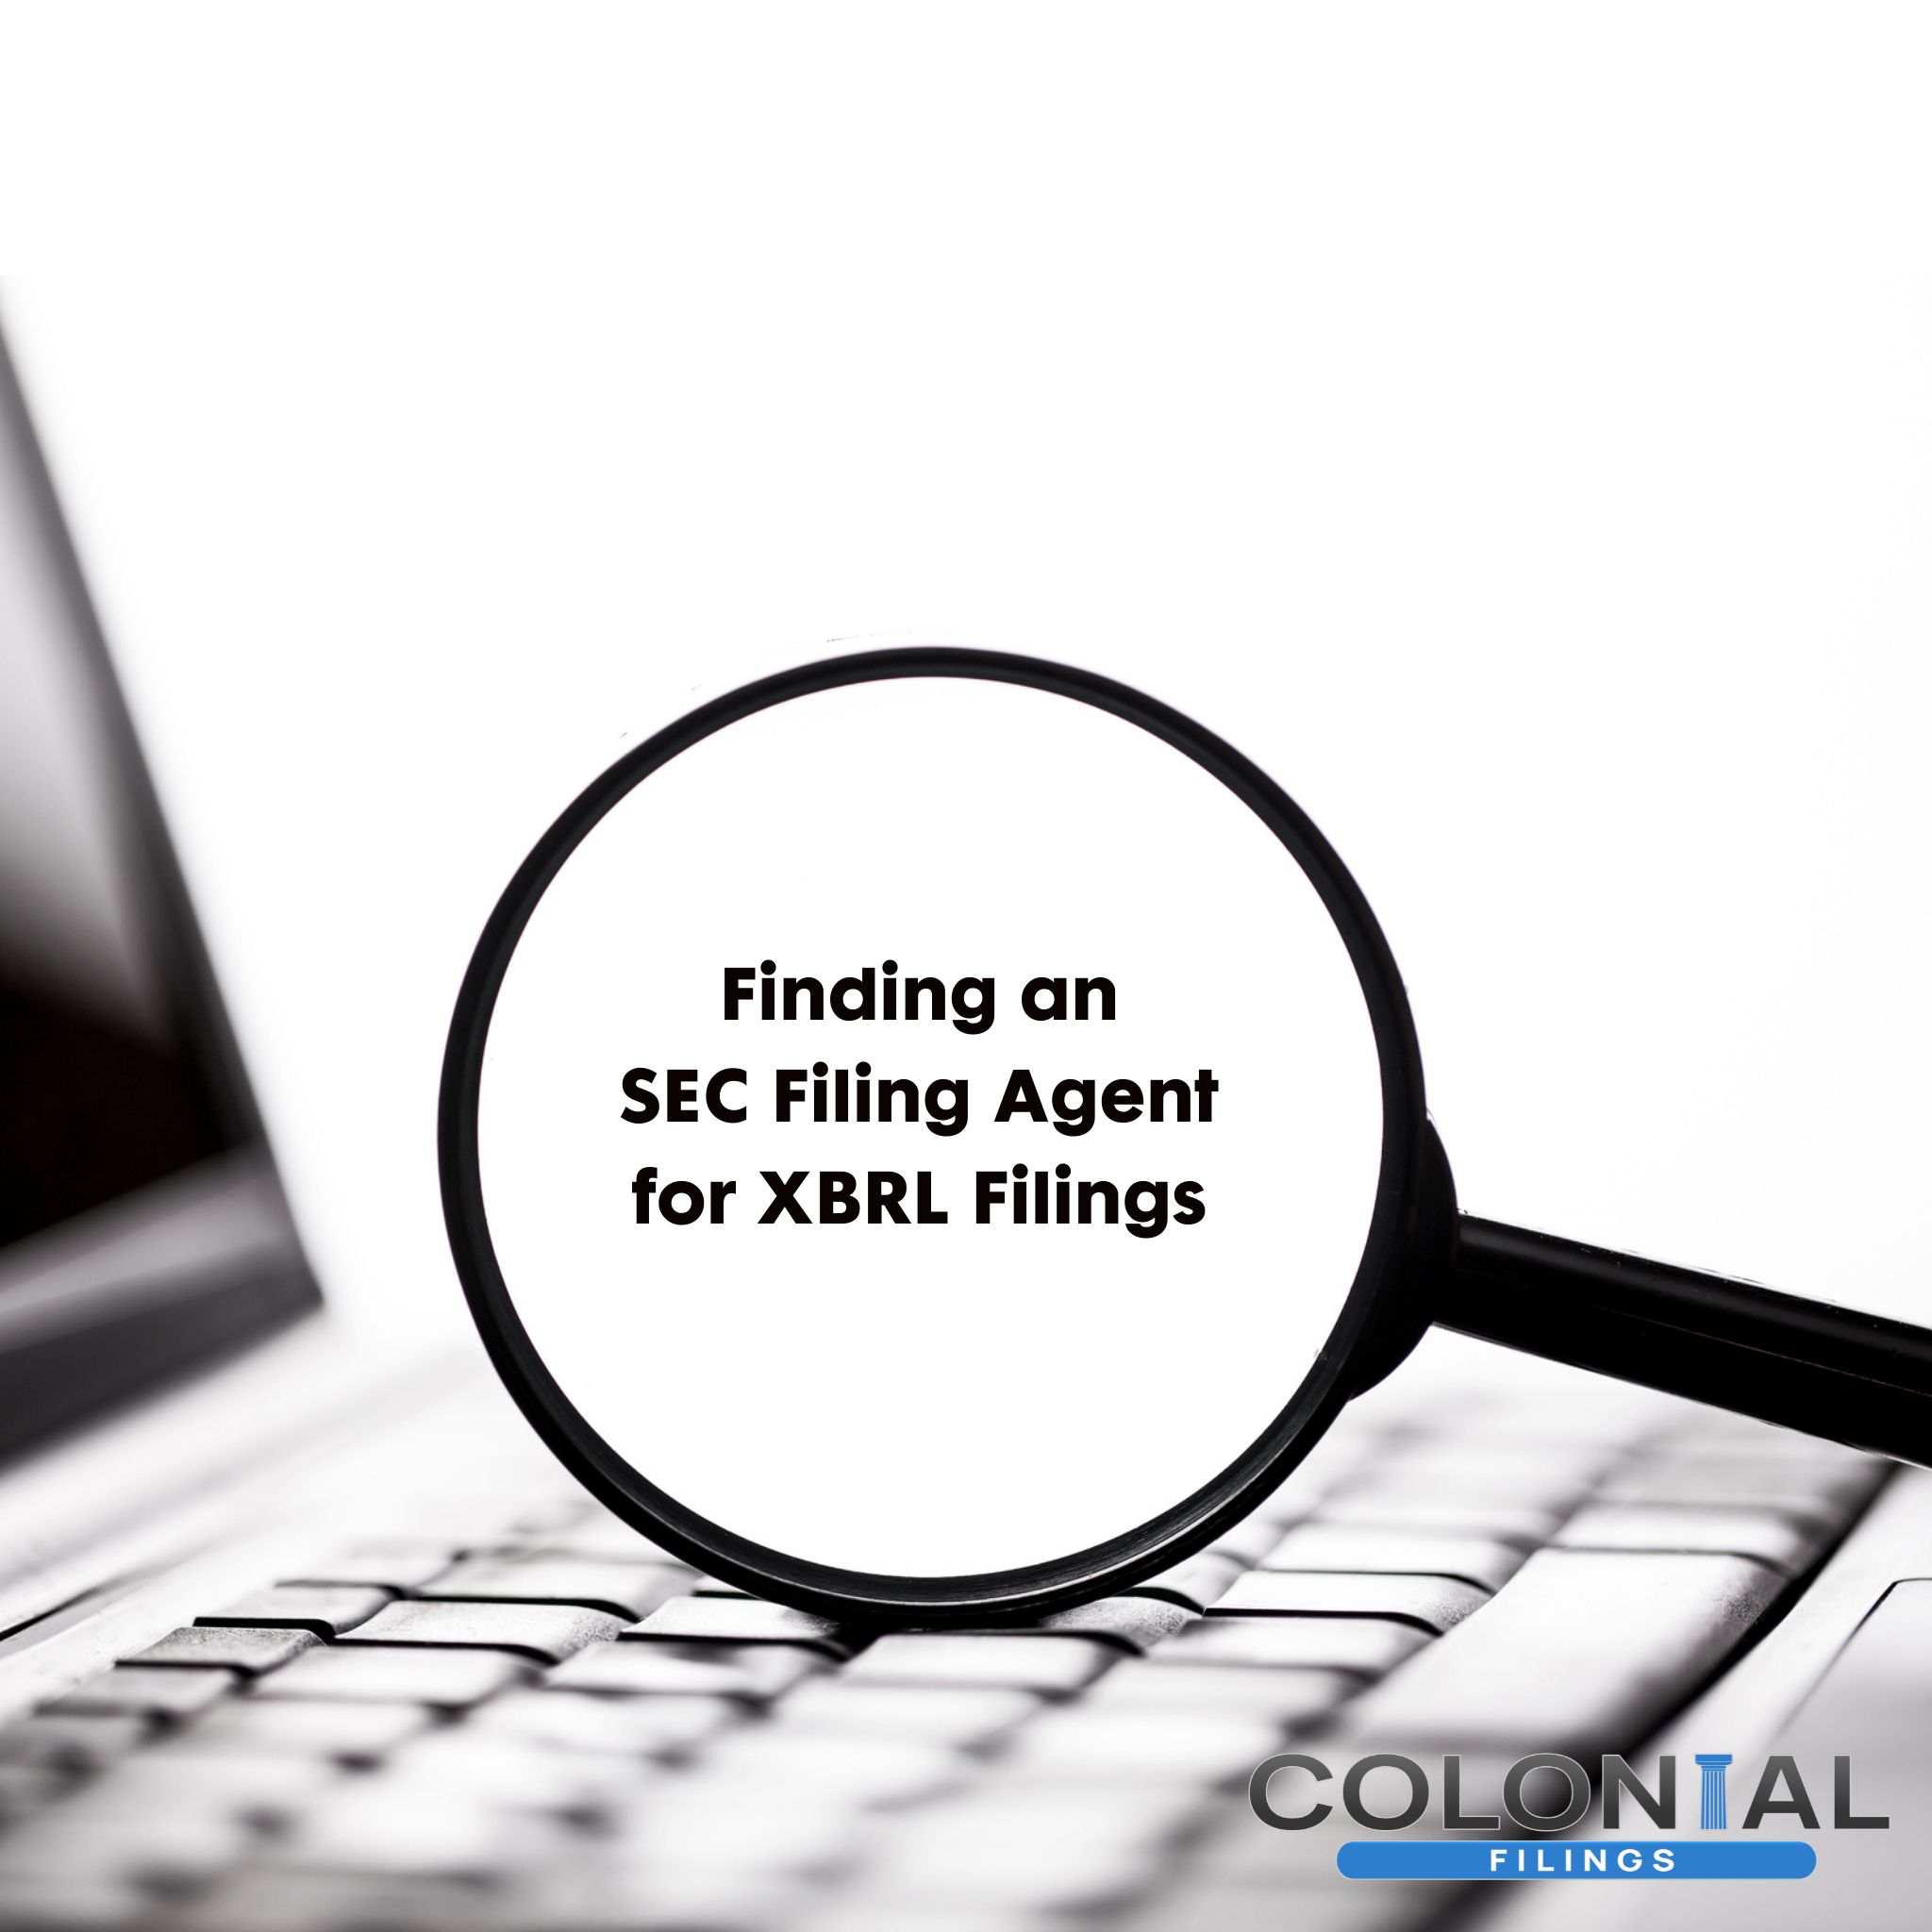 Finding an SEC Filing Agent for XBRL Filings